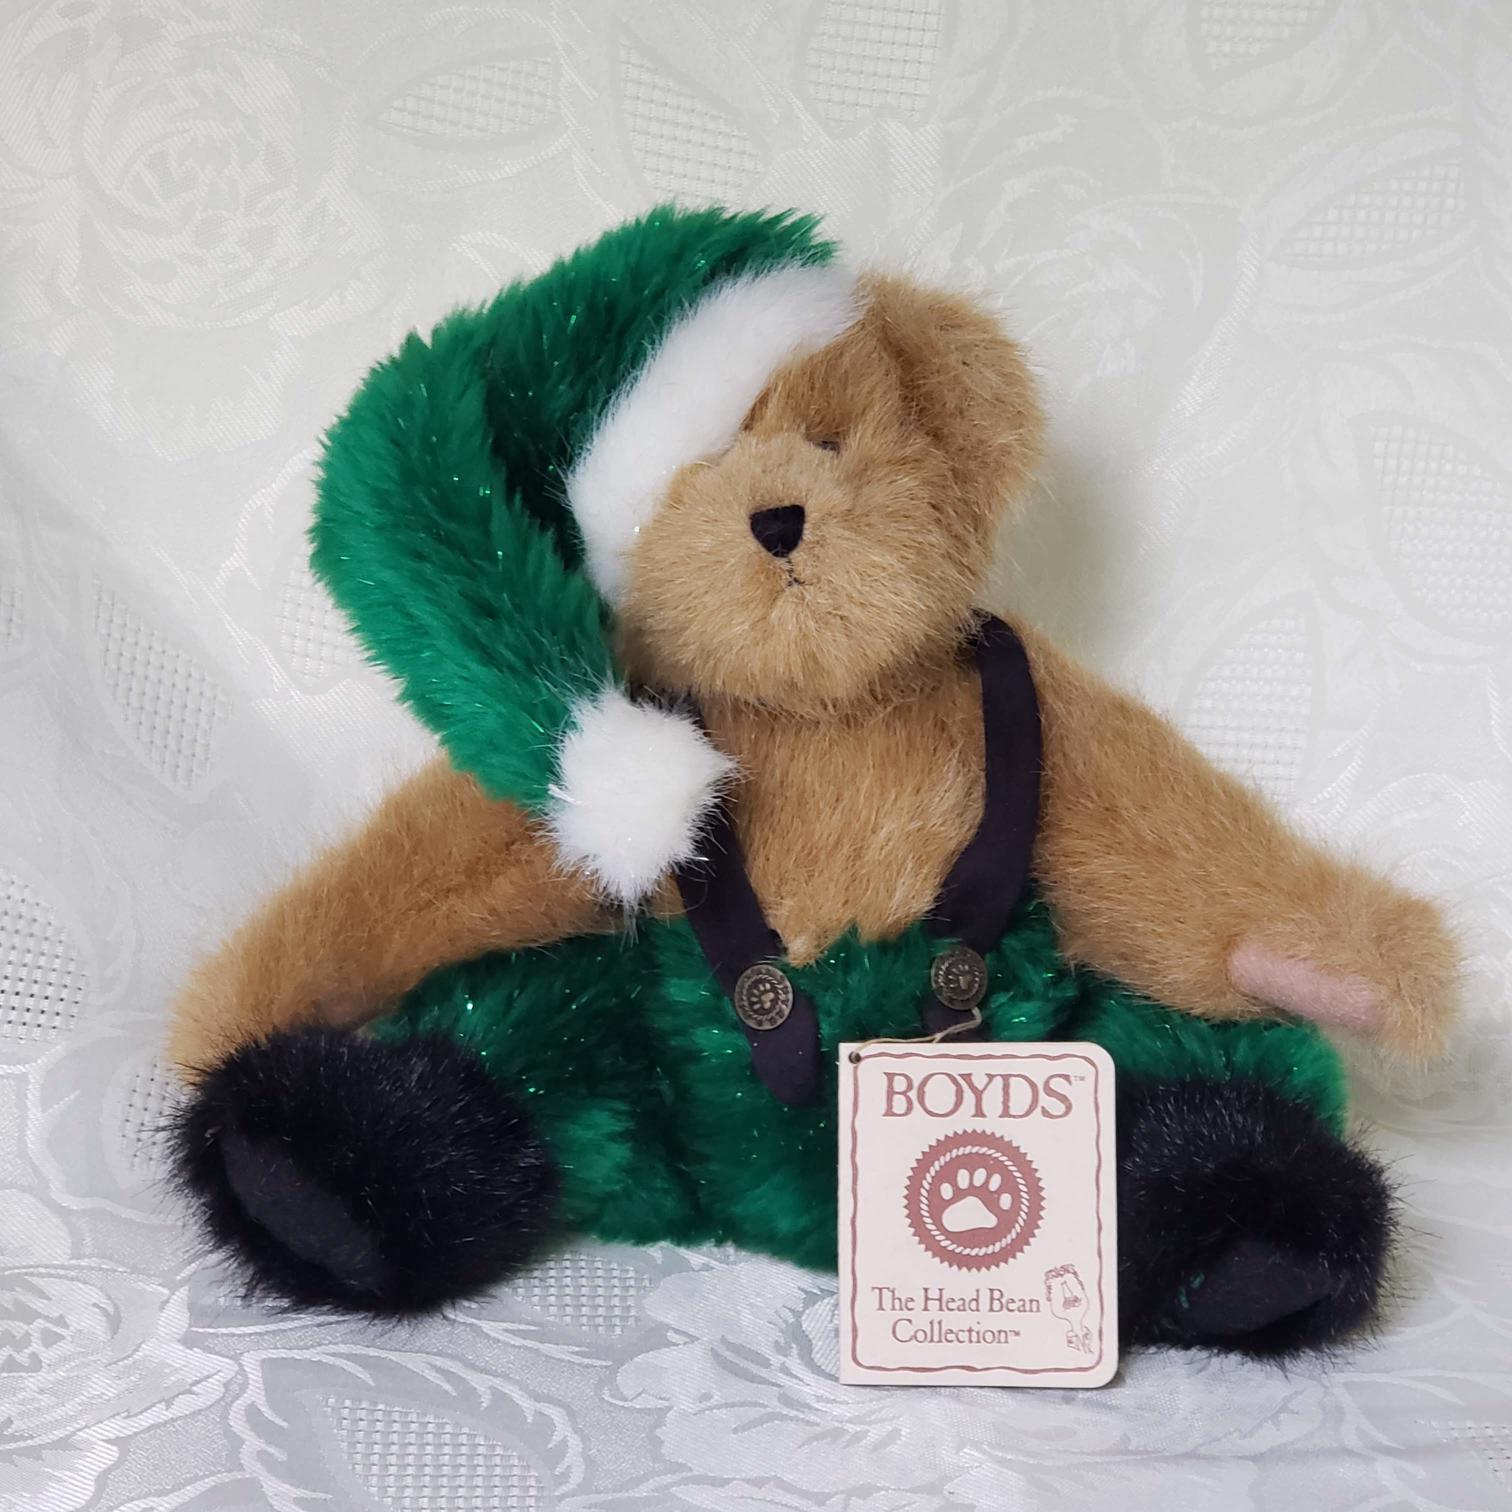 Details about   Boyd Bear *Christmas*  Plush    Barry    904365 